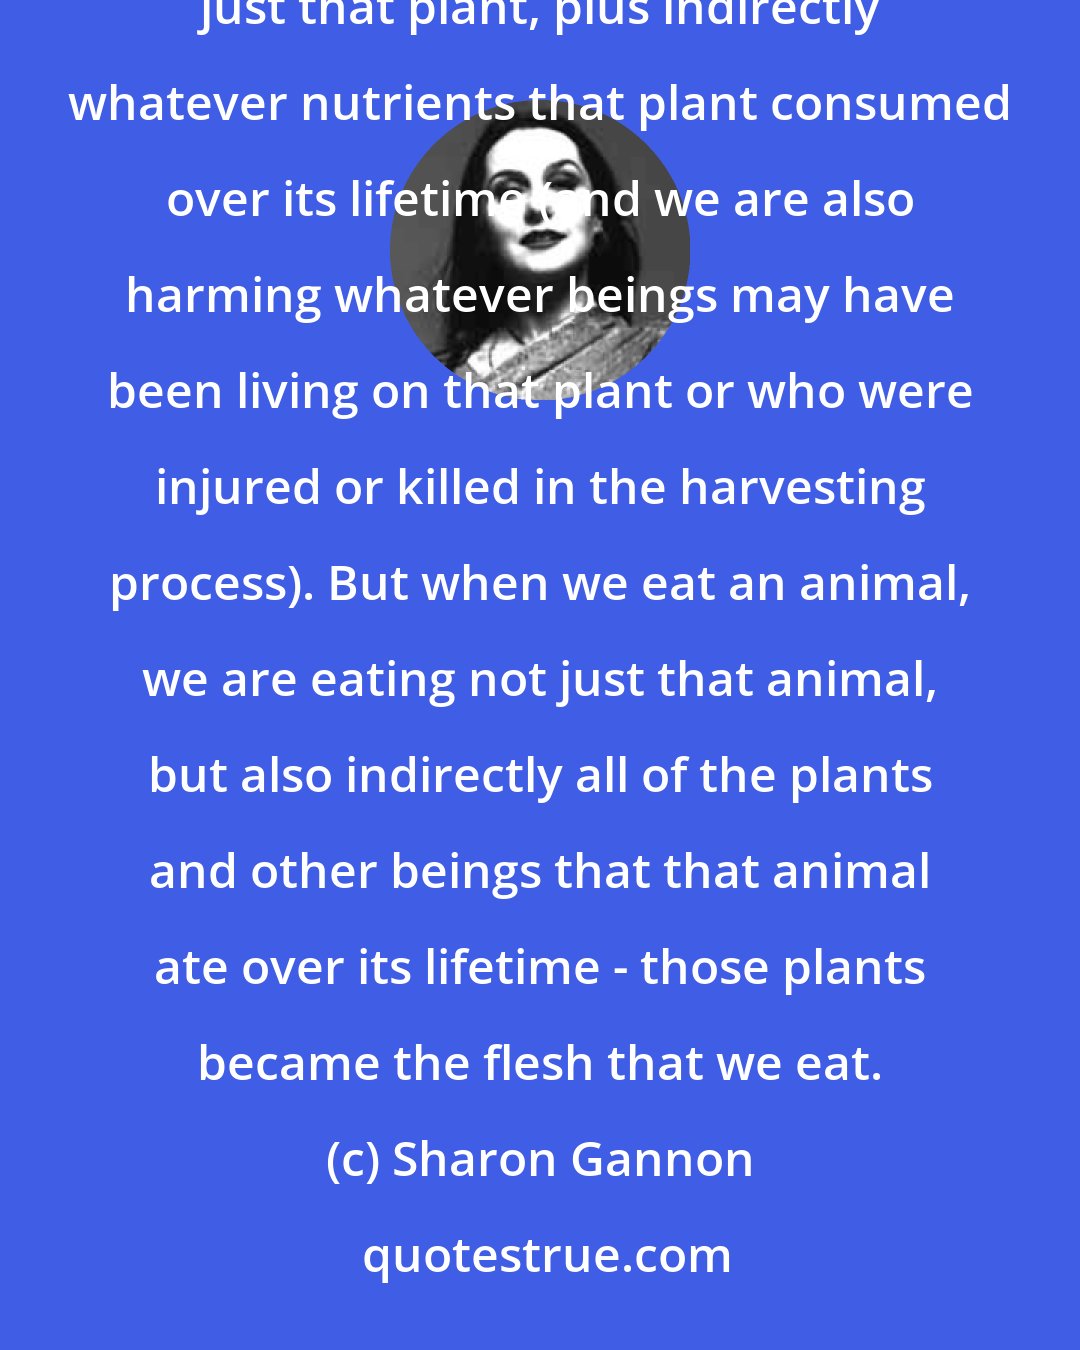 Sharon Gannon: As humans, we do get to choose what we eat, and when we choose to eat a plant, we are eating (i.e., harming) just that plant, plus indirectly whatever nutrients that plant consumed over its lifetime (and we are also harming whatever beings may have been living on that plant or who were injured or killed in the harvesting process). But when we eat an animal, we are eating not just that animal, but also indirectly all of the plants and other beings that that animal ate over its lifetime - those plants became the flesh that we eat.